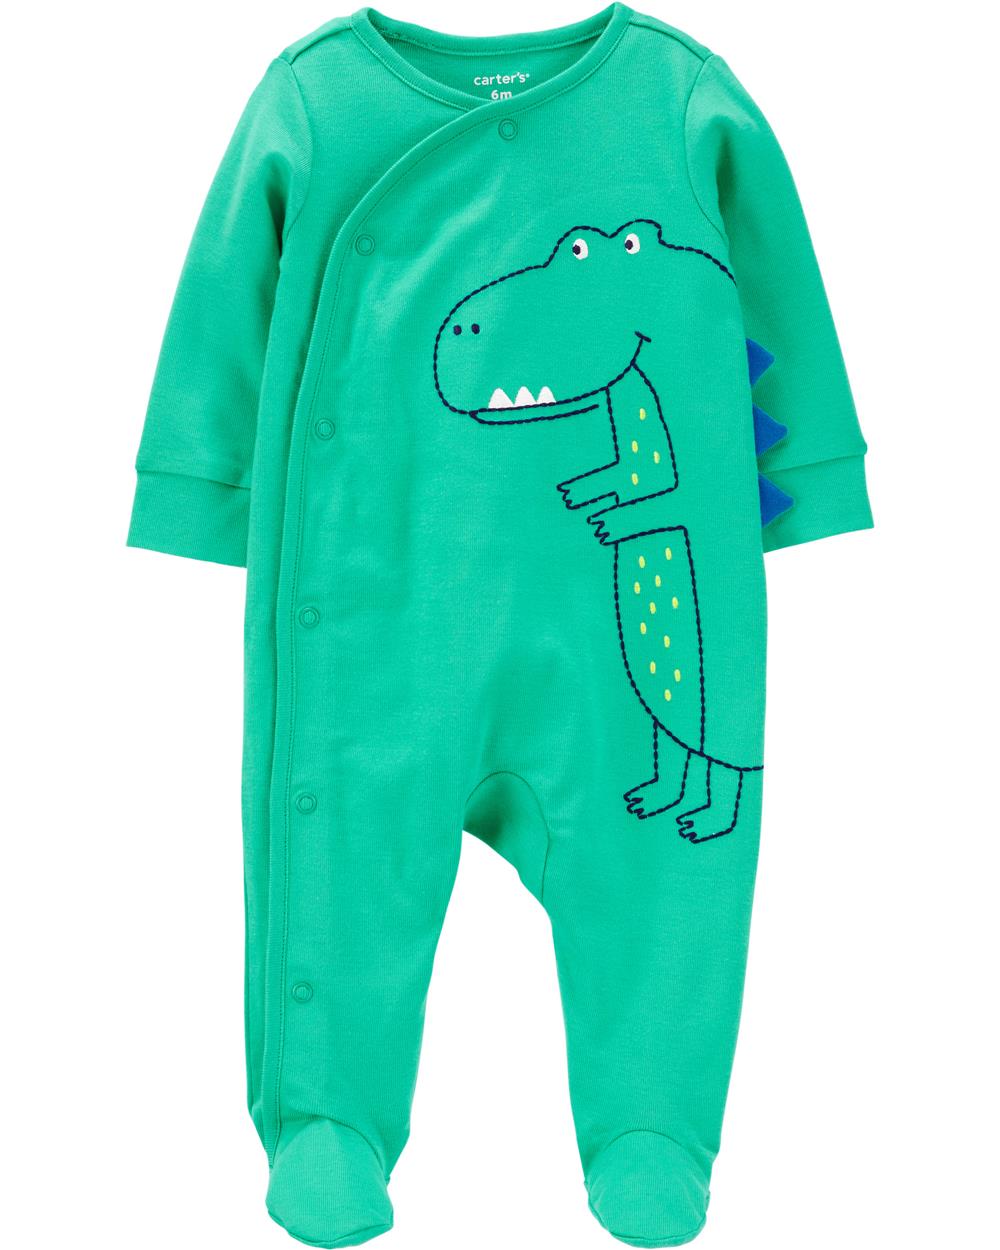 Carters Boys 0-9 Months T-Rex Sleep and Play